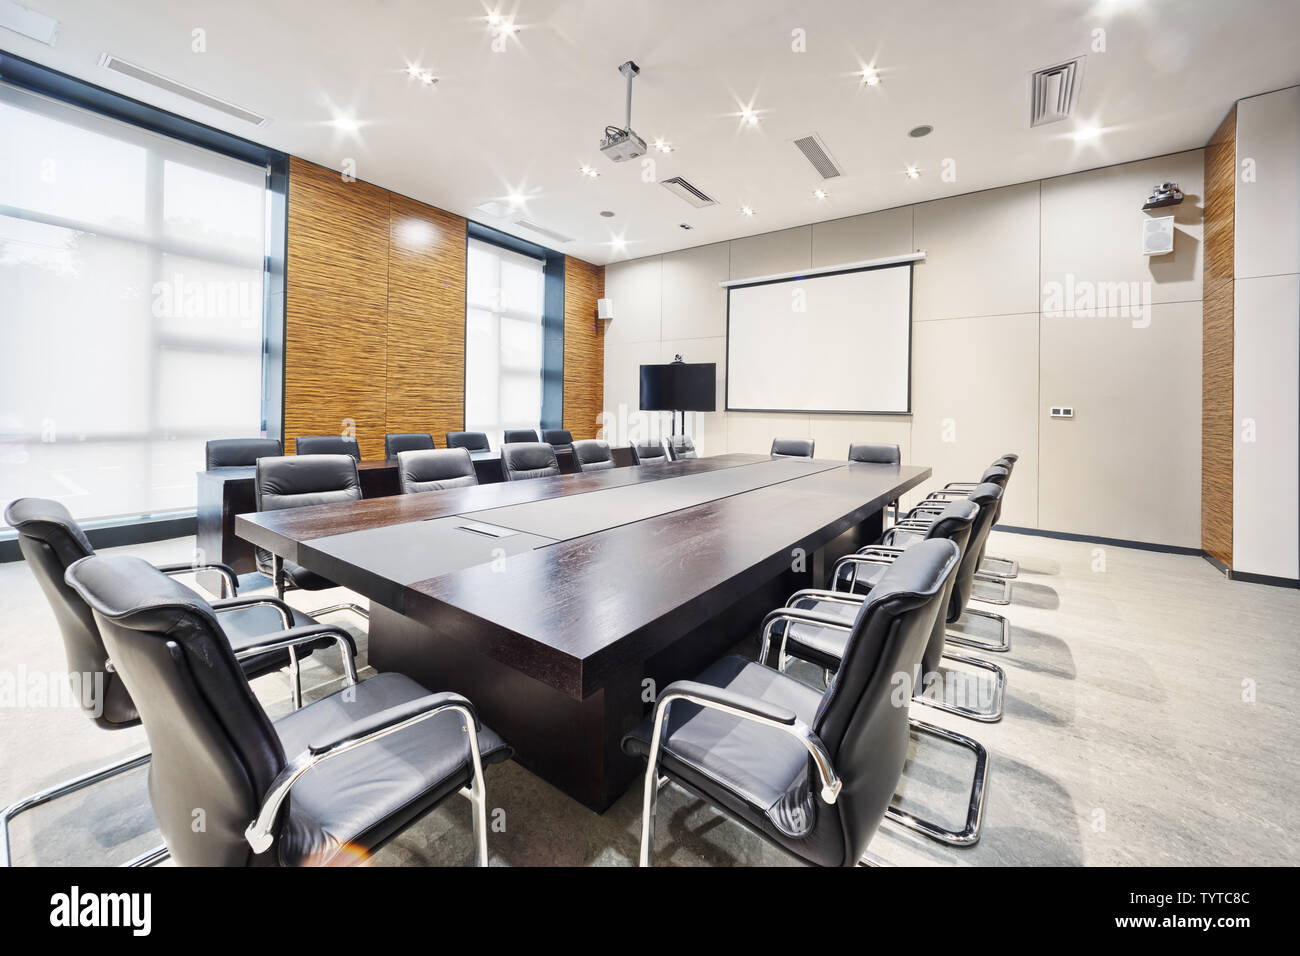 modern office meeting room interior and decoration Stock Photo - Alamy